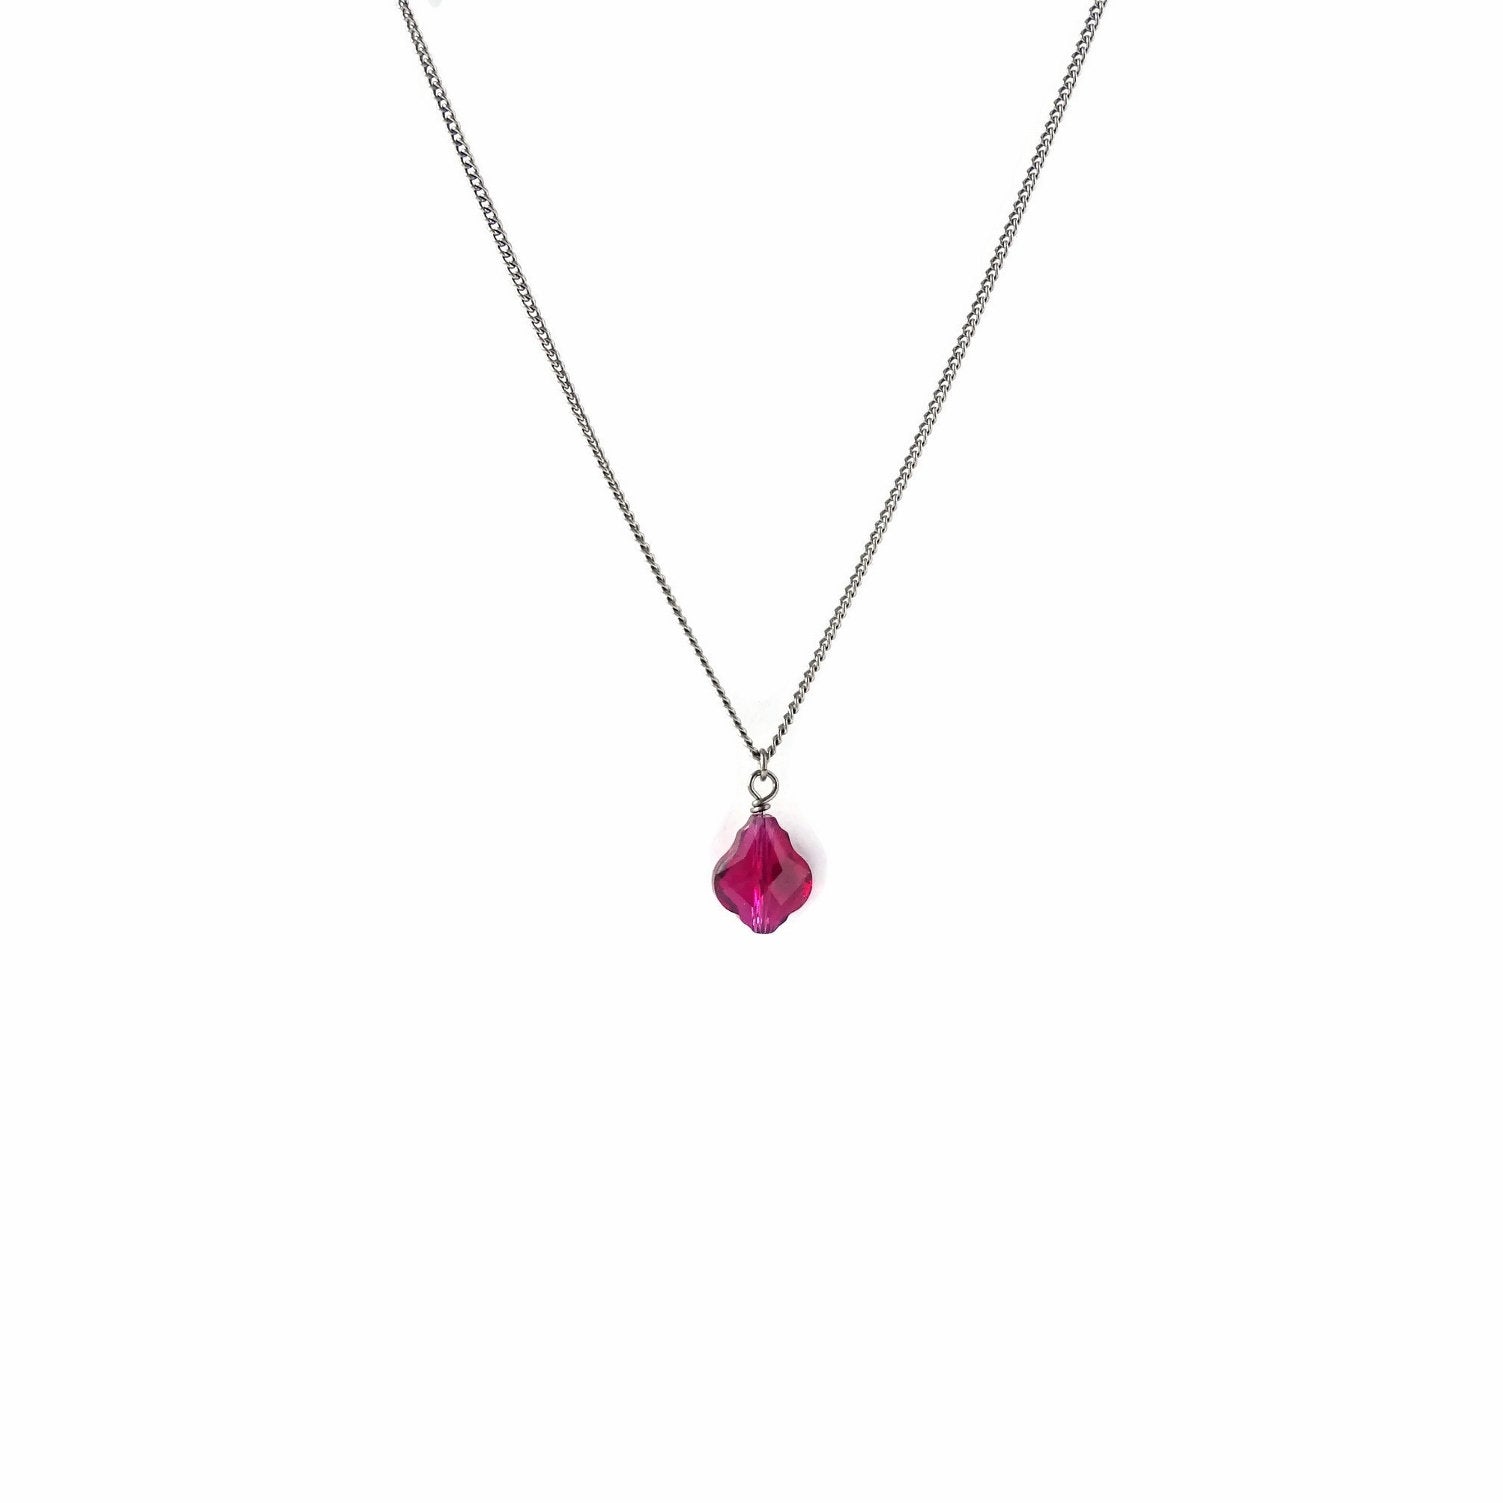 Ruby Baroque Crystal Titanium Necklace, Nickel Free Necklace For Sensitive Skin, Ruby Red Pink Swarovski Crystal, Pure Titanium Jewelry